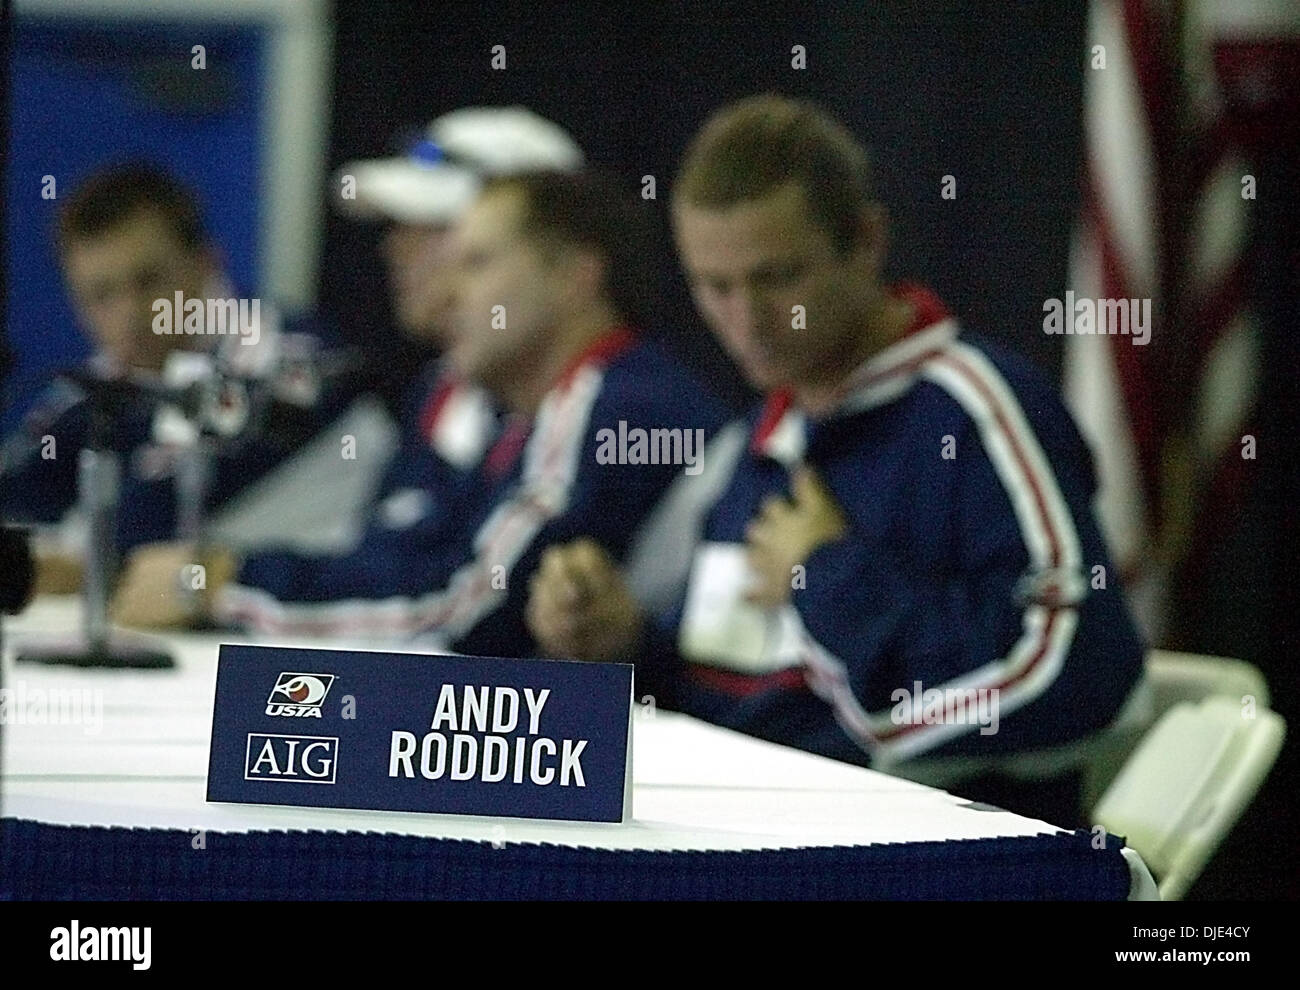 Apr 05, 2004; Delray Beach, FL, USA; Andy Roddick's name plate sits on the table away from the rest of the US Davis Cup team during a press conference at the Delray Beach Stadium and Tennis Center Monday, April 5, 2004, as headway picks up towards the big match against Sweden this weekend. Roddick was given the day off by team captain Patrick McEnroe after Roddick's win in the Nasd Stock Photo